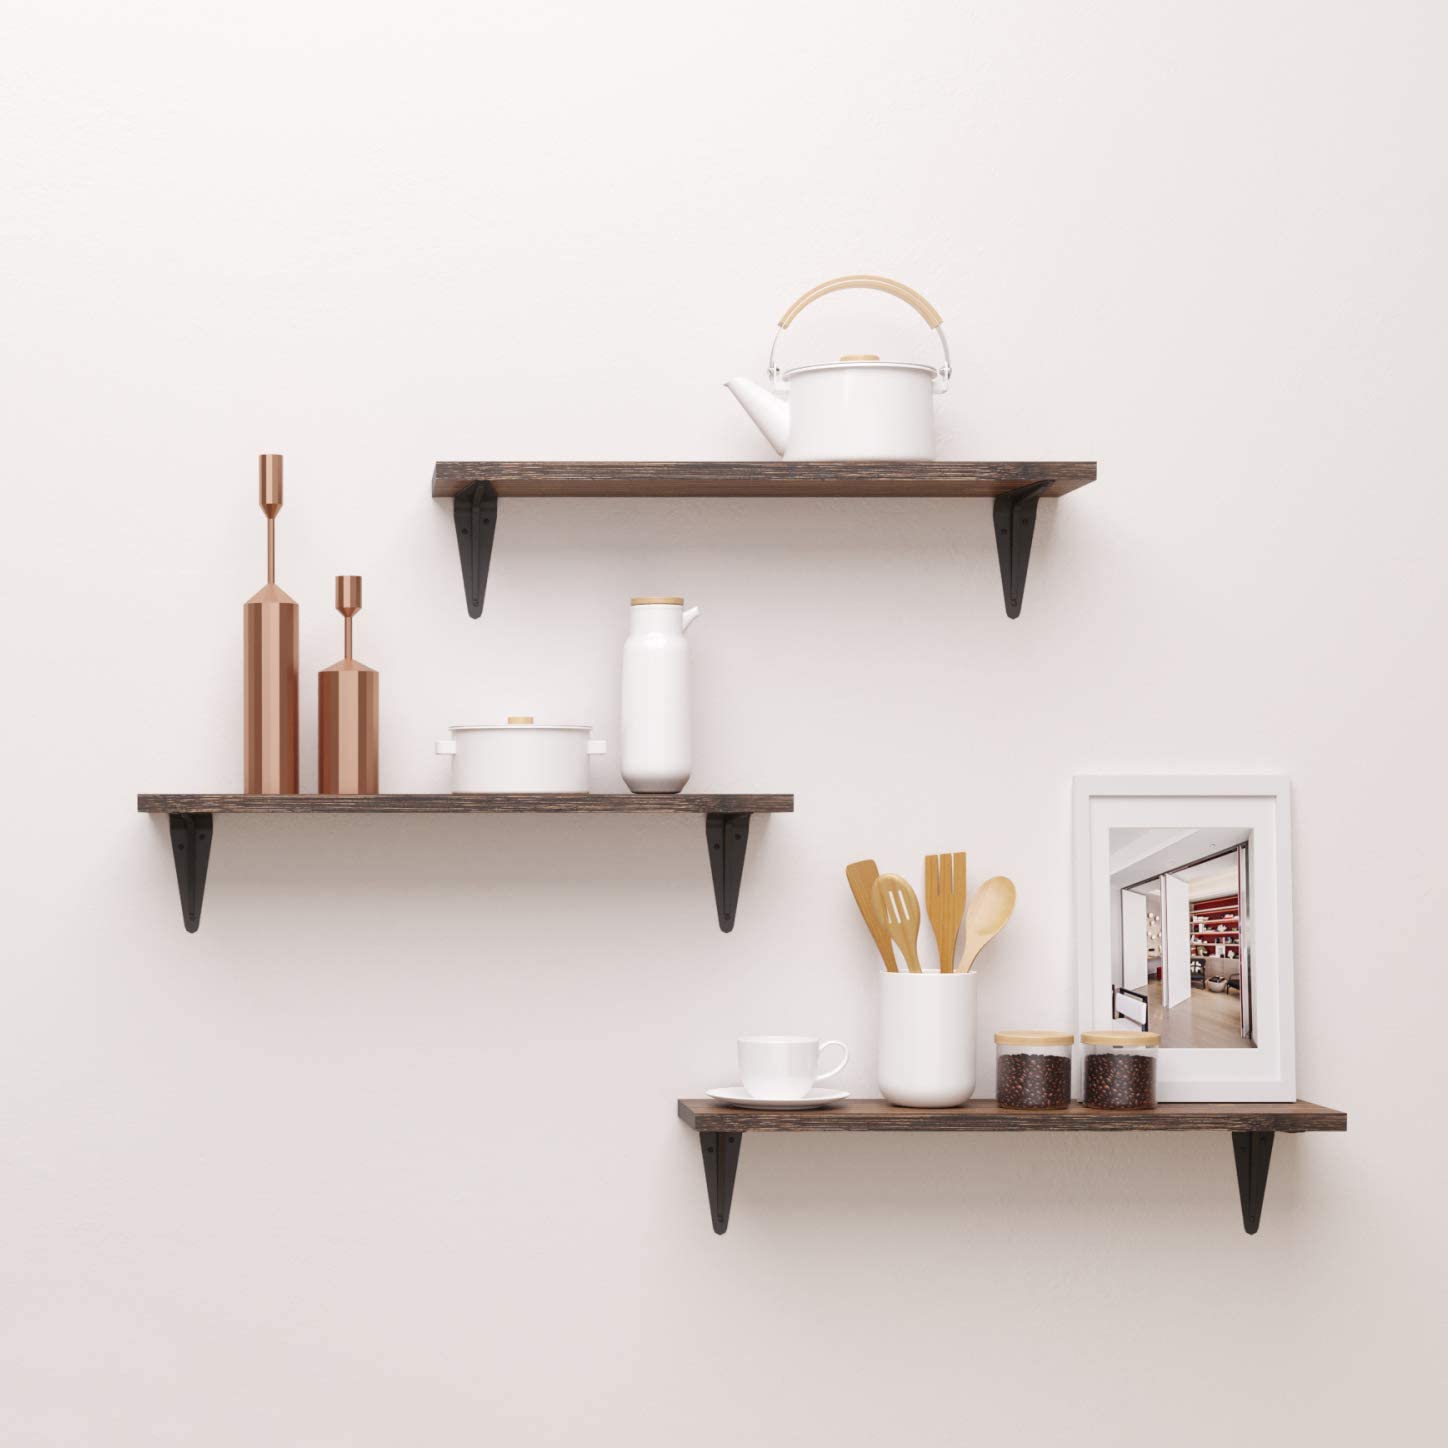 Floating Storage Shelves An Easy Diy, How To Fix Sagging Wall Shelves